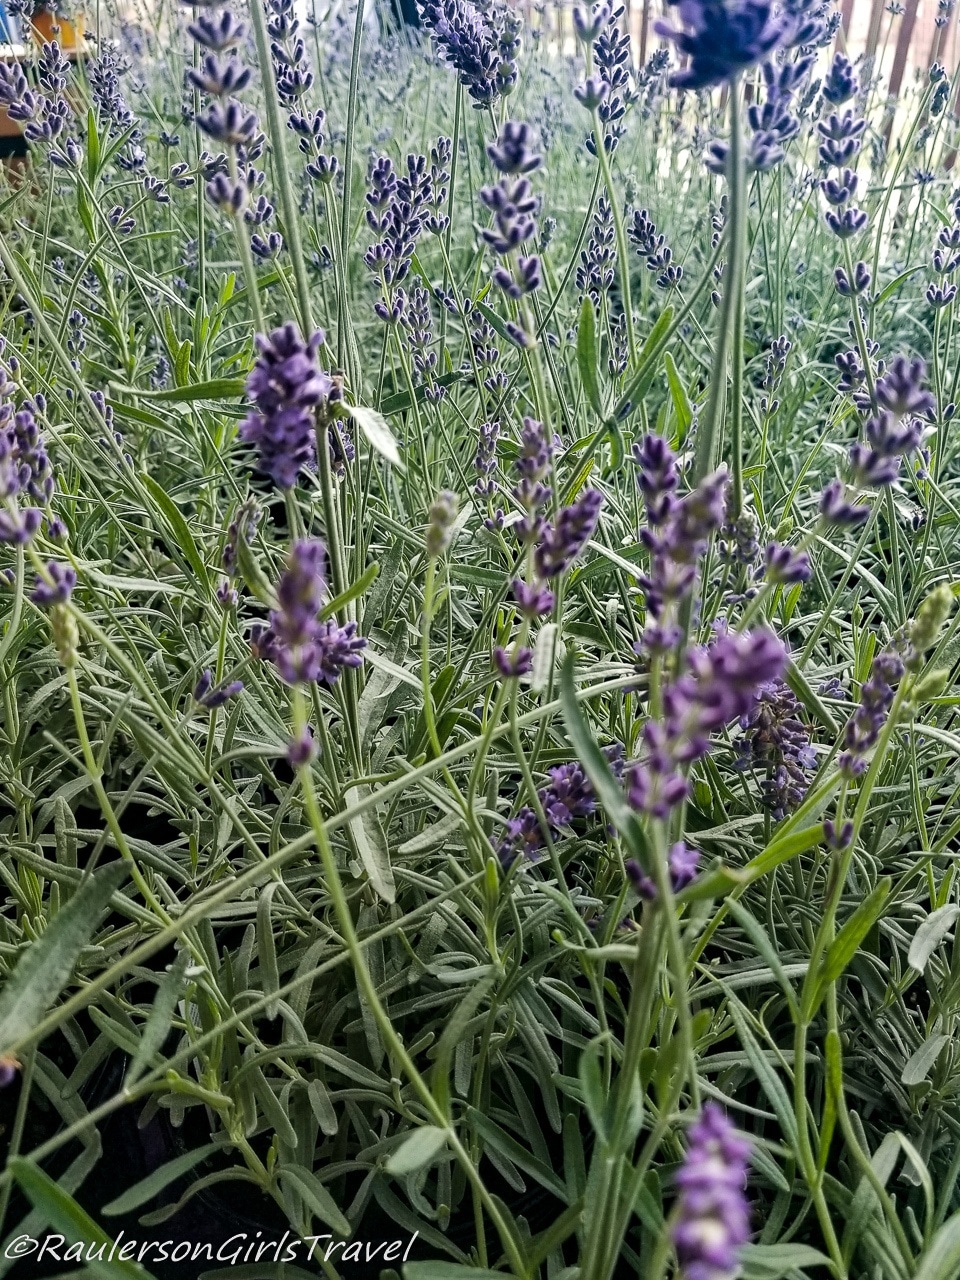 Group of Lavender flowers in a field